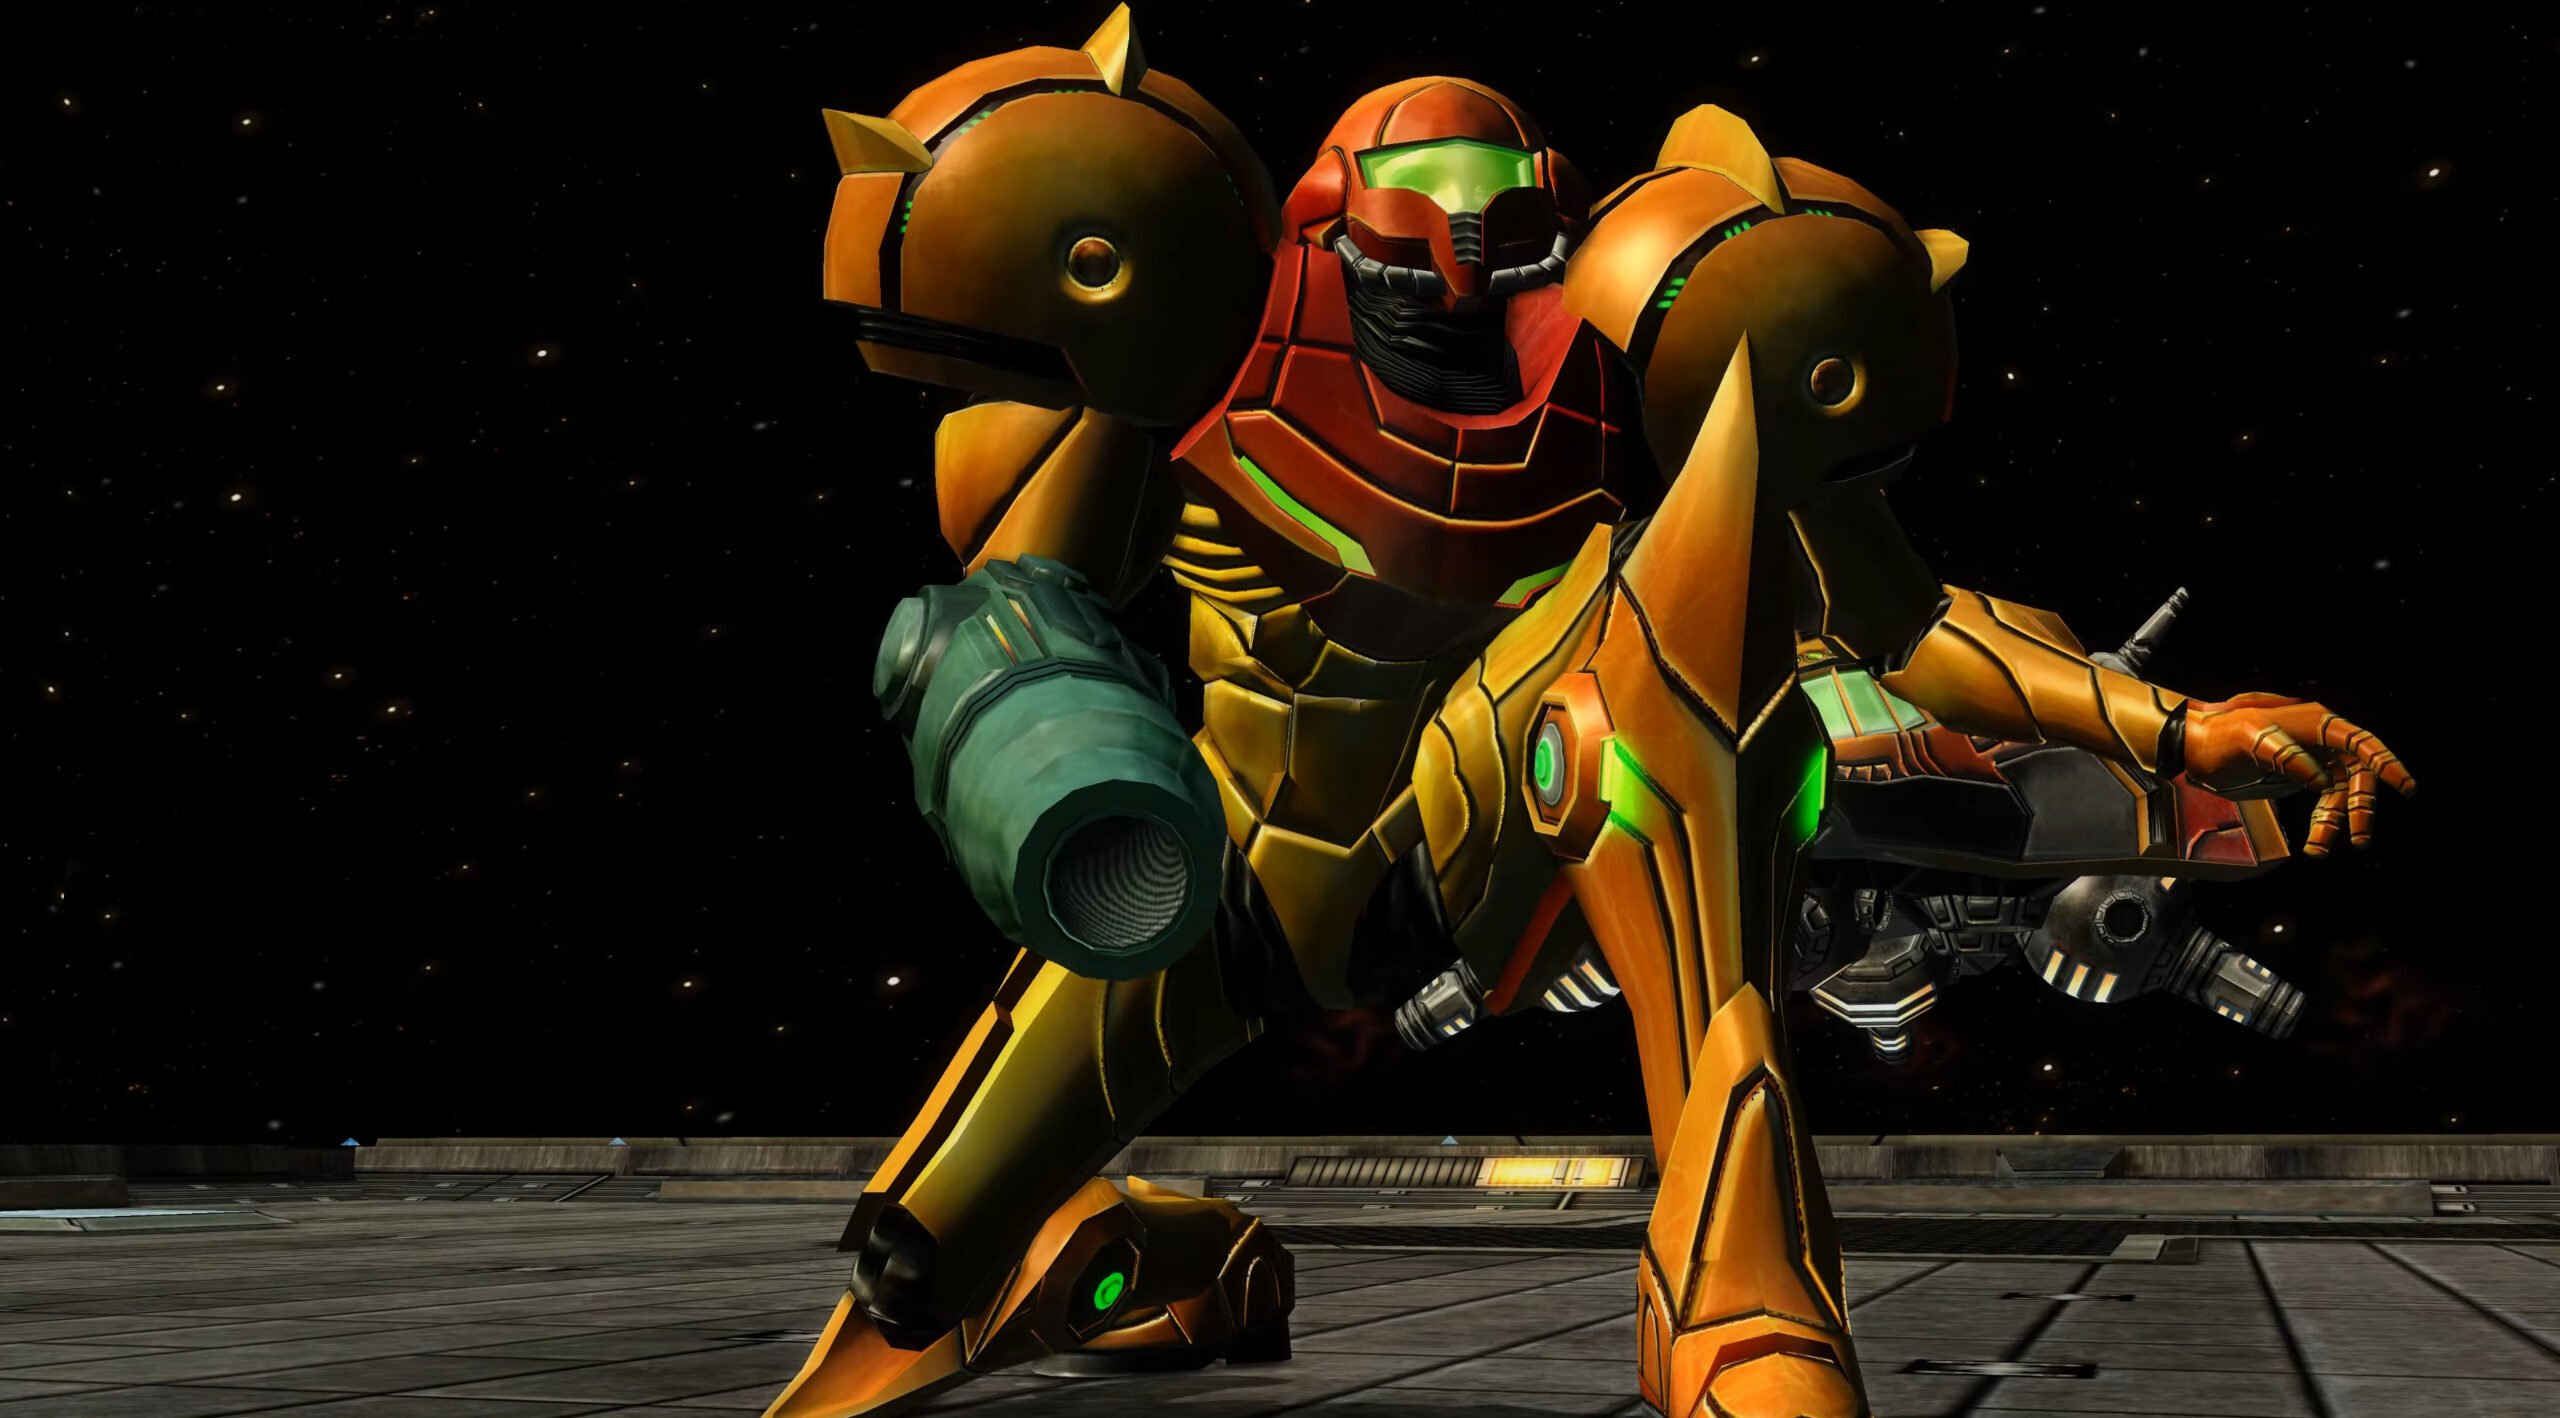 Playing Metroid Prime on a Steam Deck